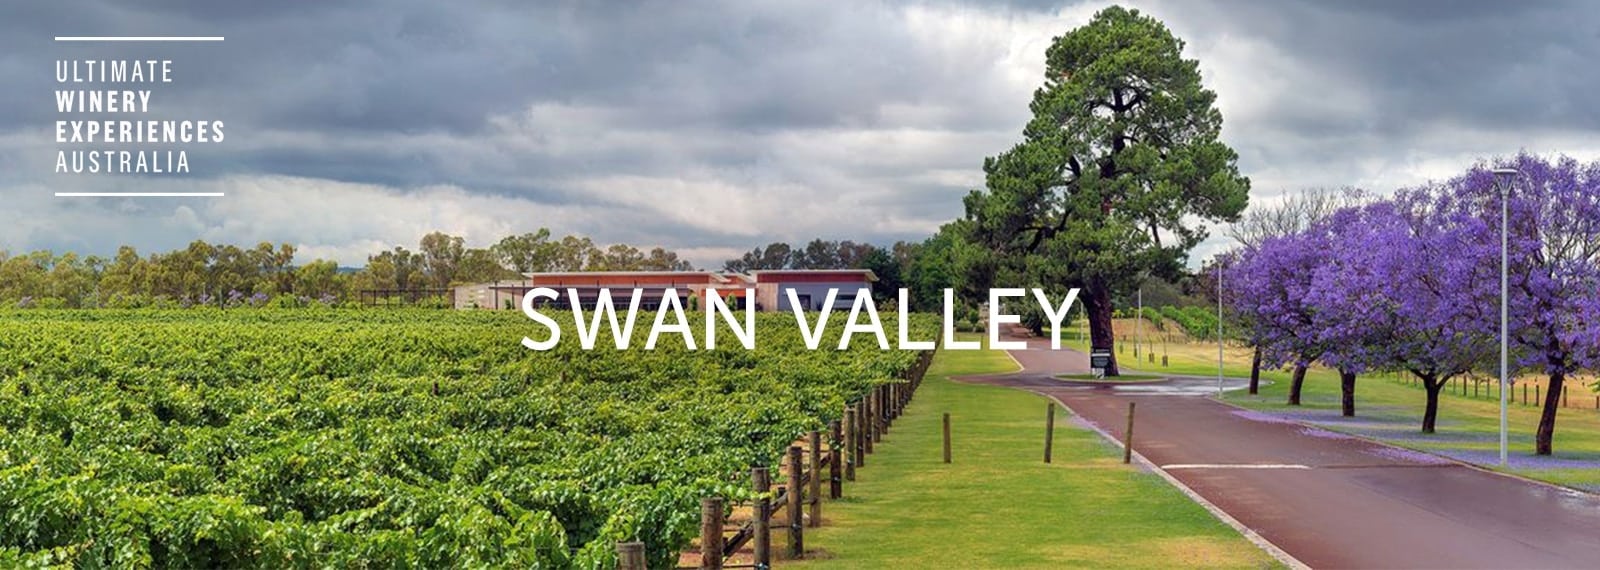 swan valley limo wine tours